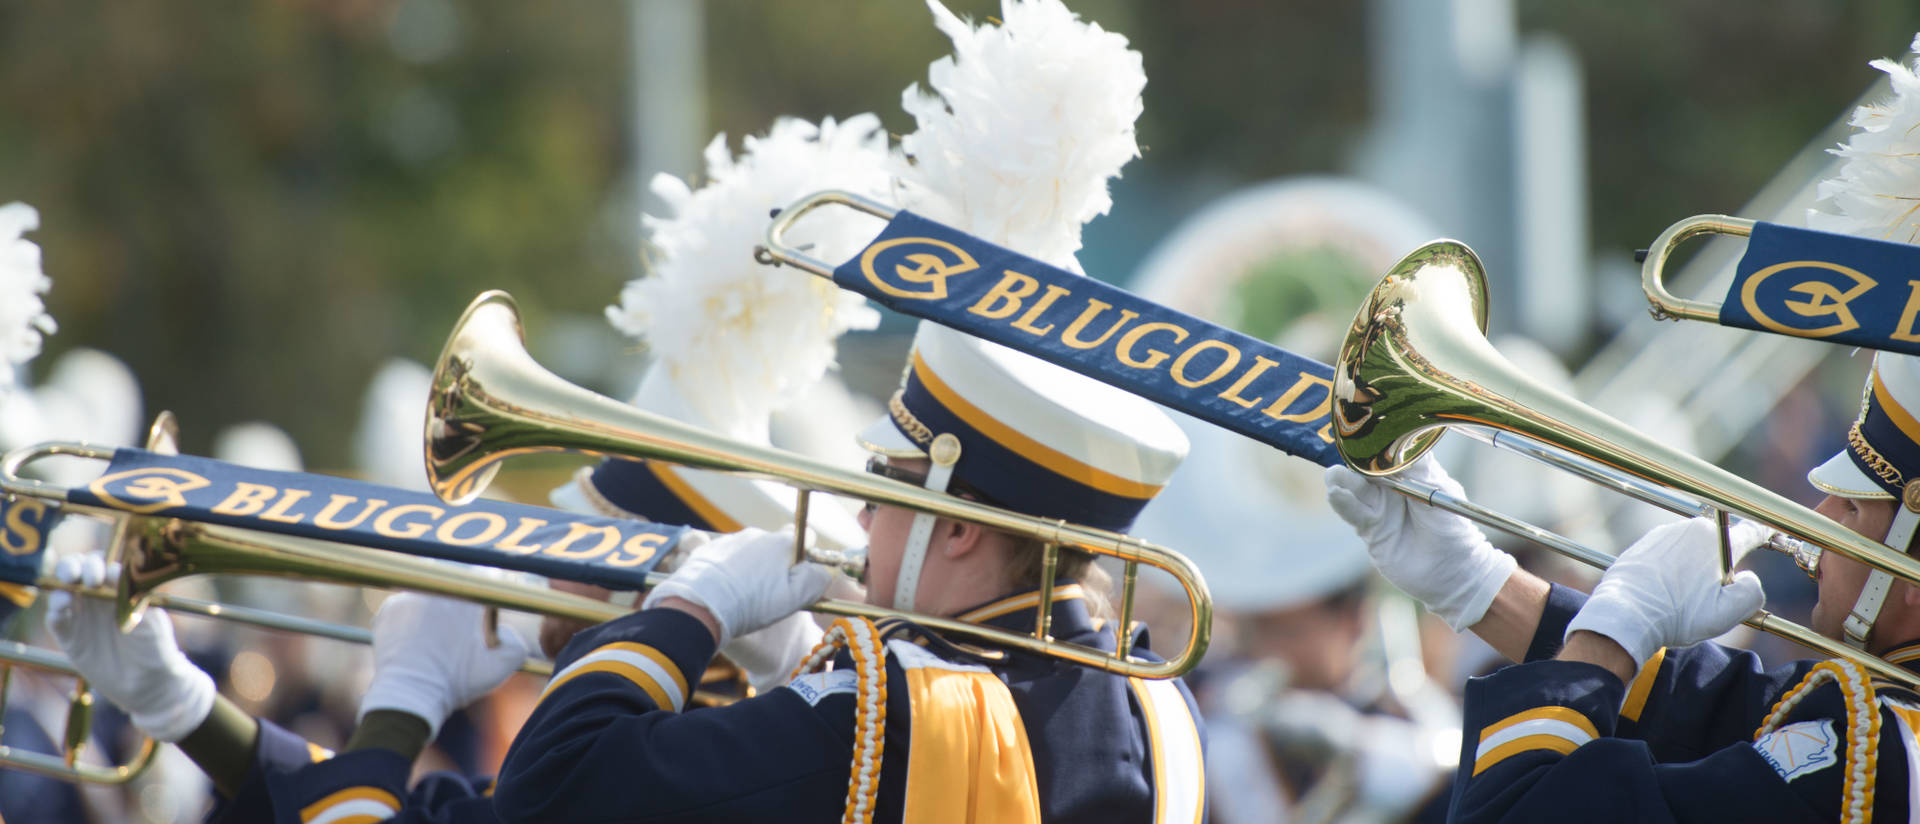 Blugold marching band on a fall day